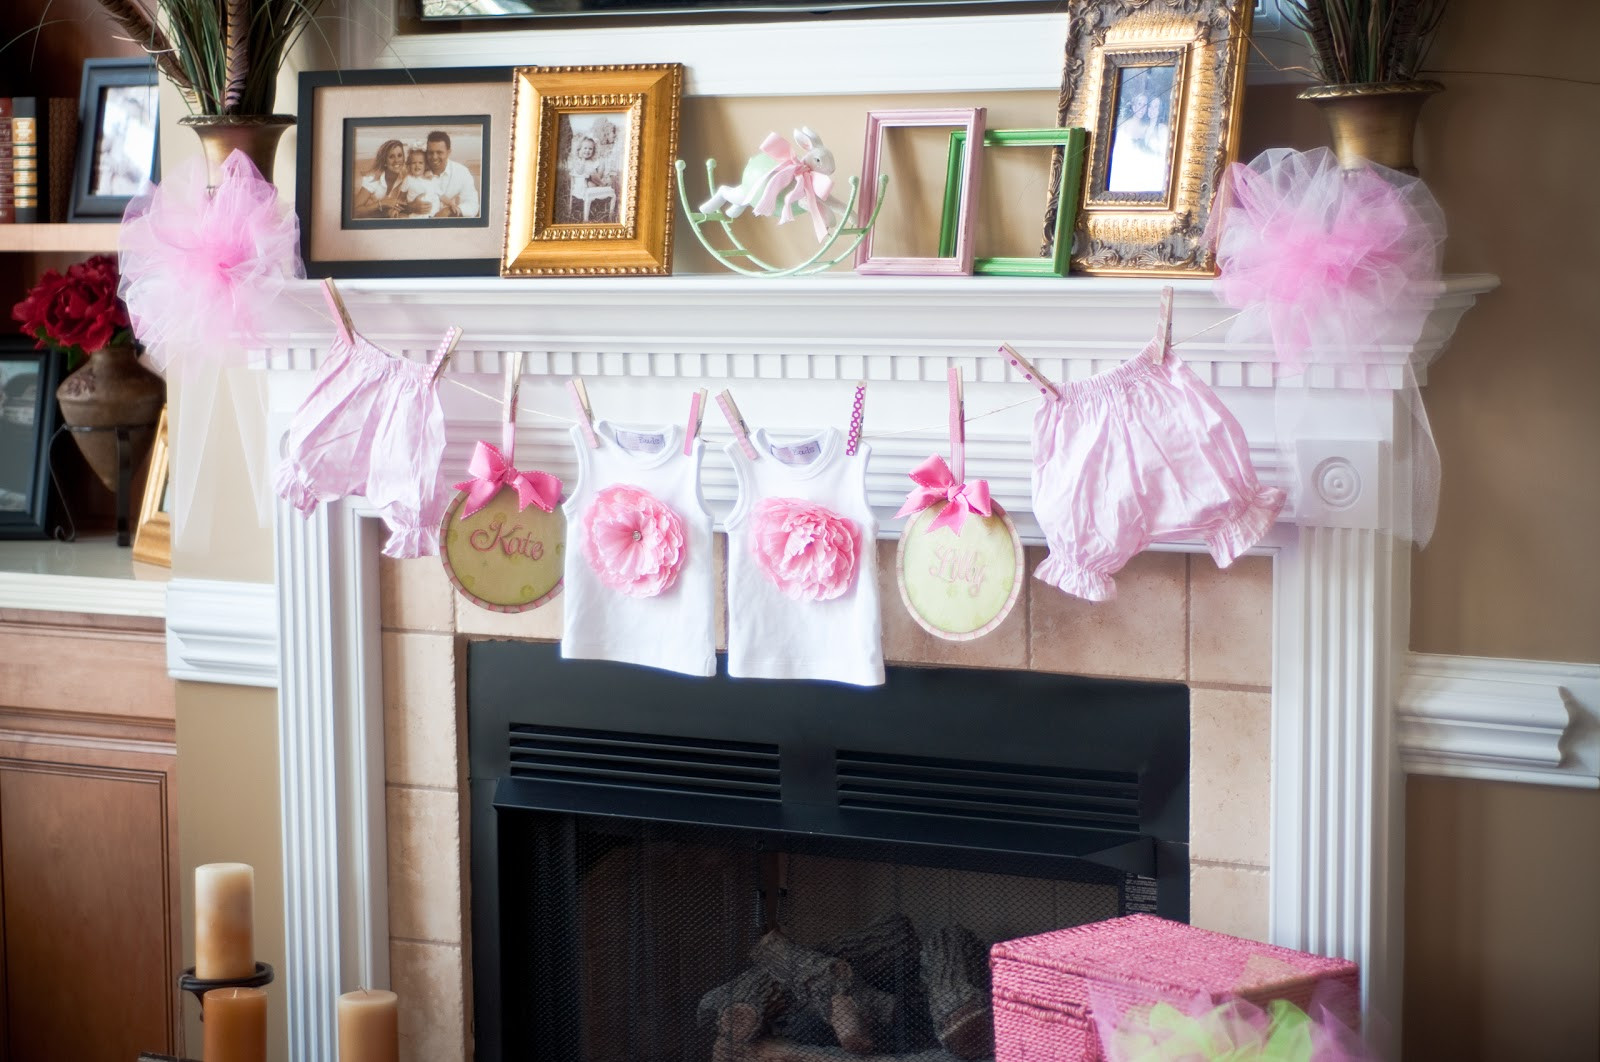 Ideas For Girl Baby Shower Decorations
 paws & re thread baby shower decorating ideas clothes